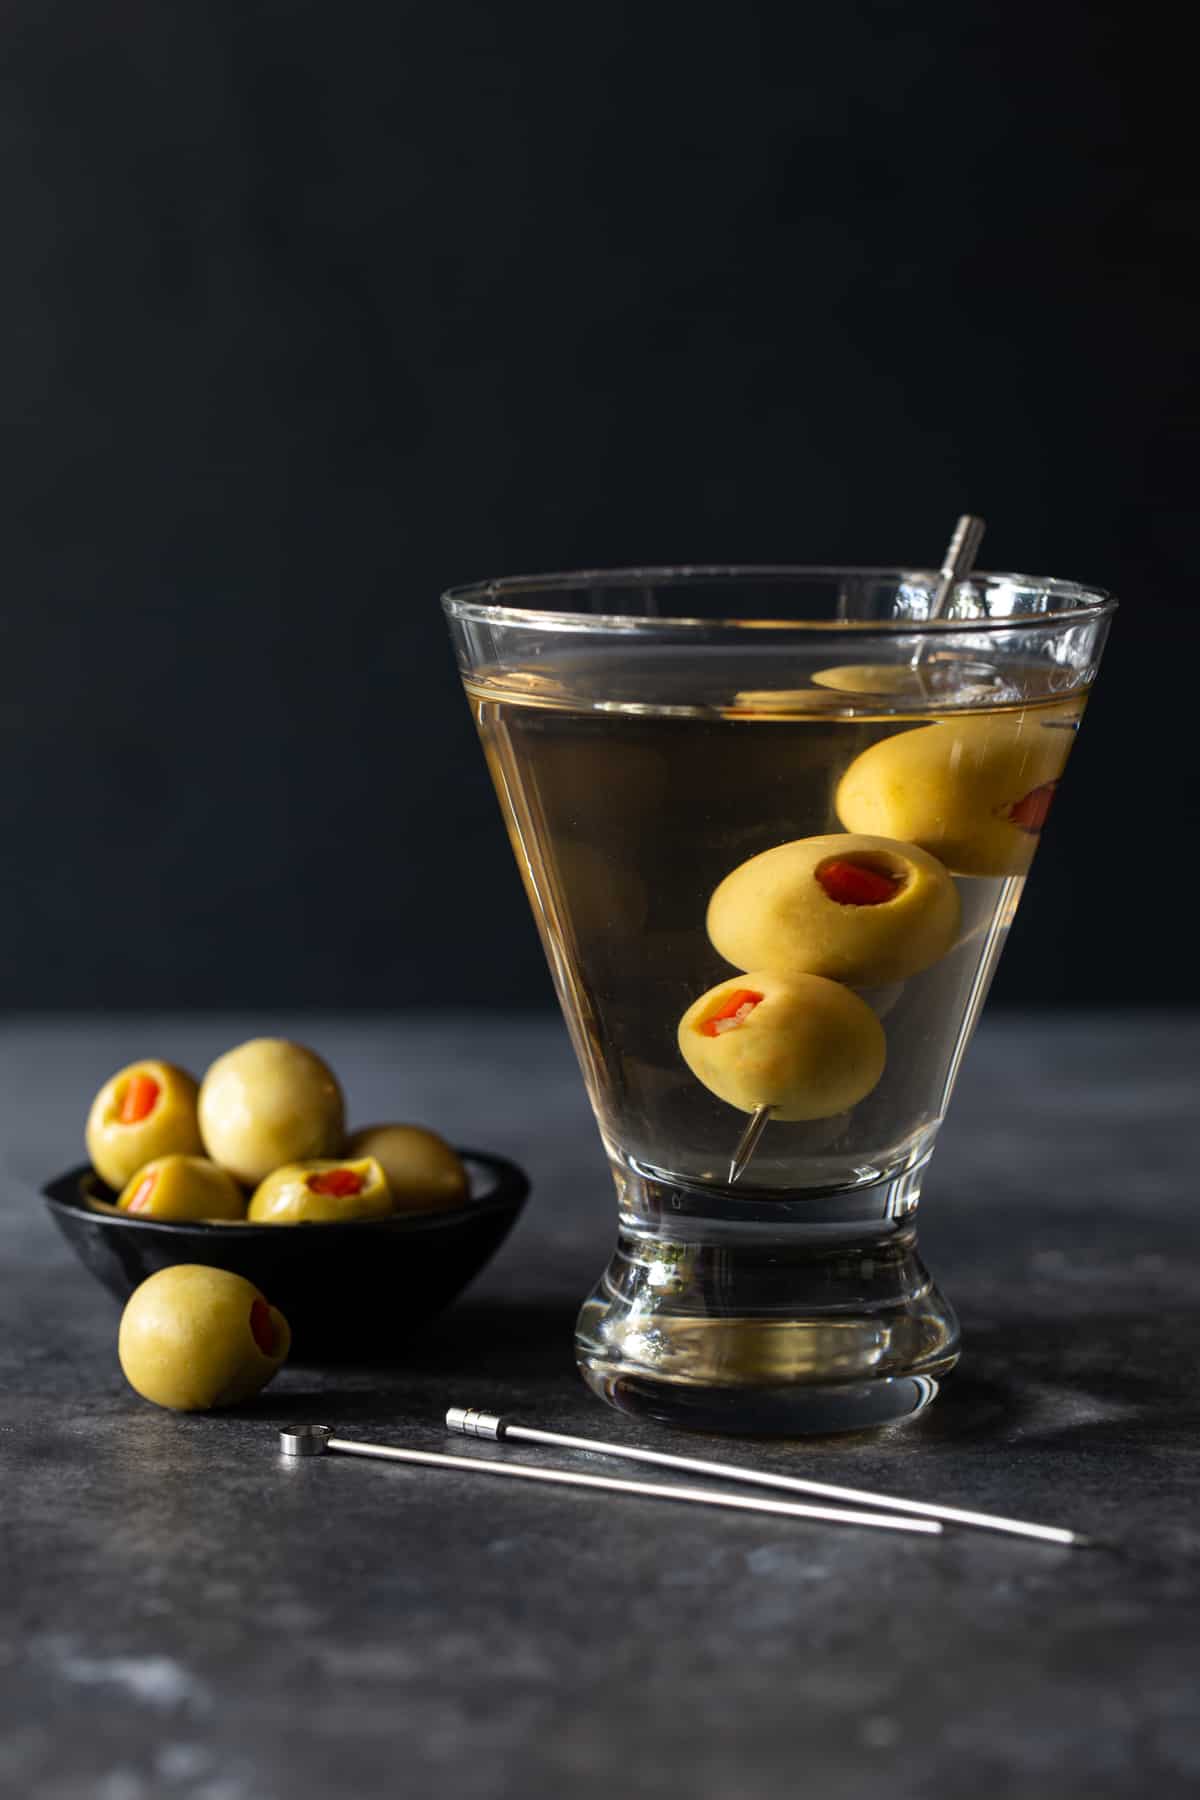 bowl of olives with metal skewers on board and filled martini glass with olives in it